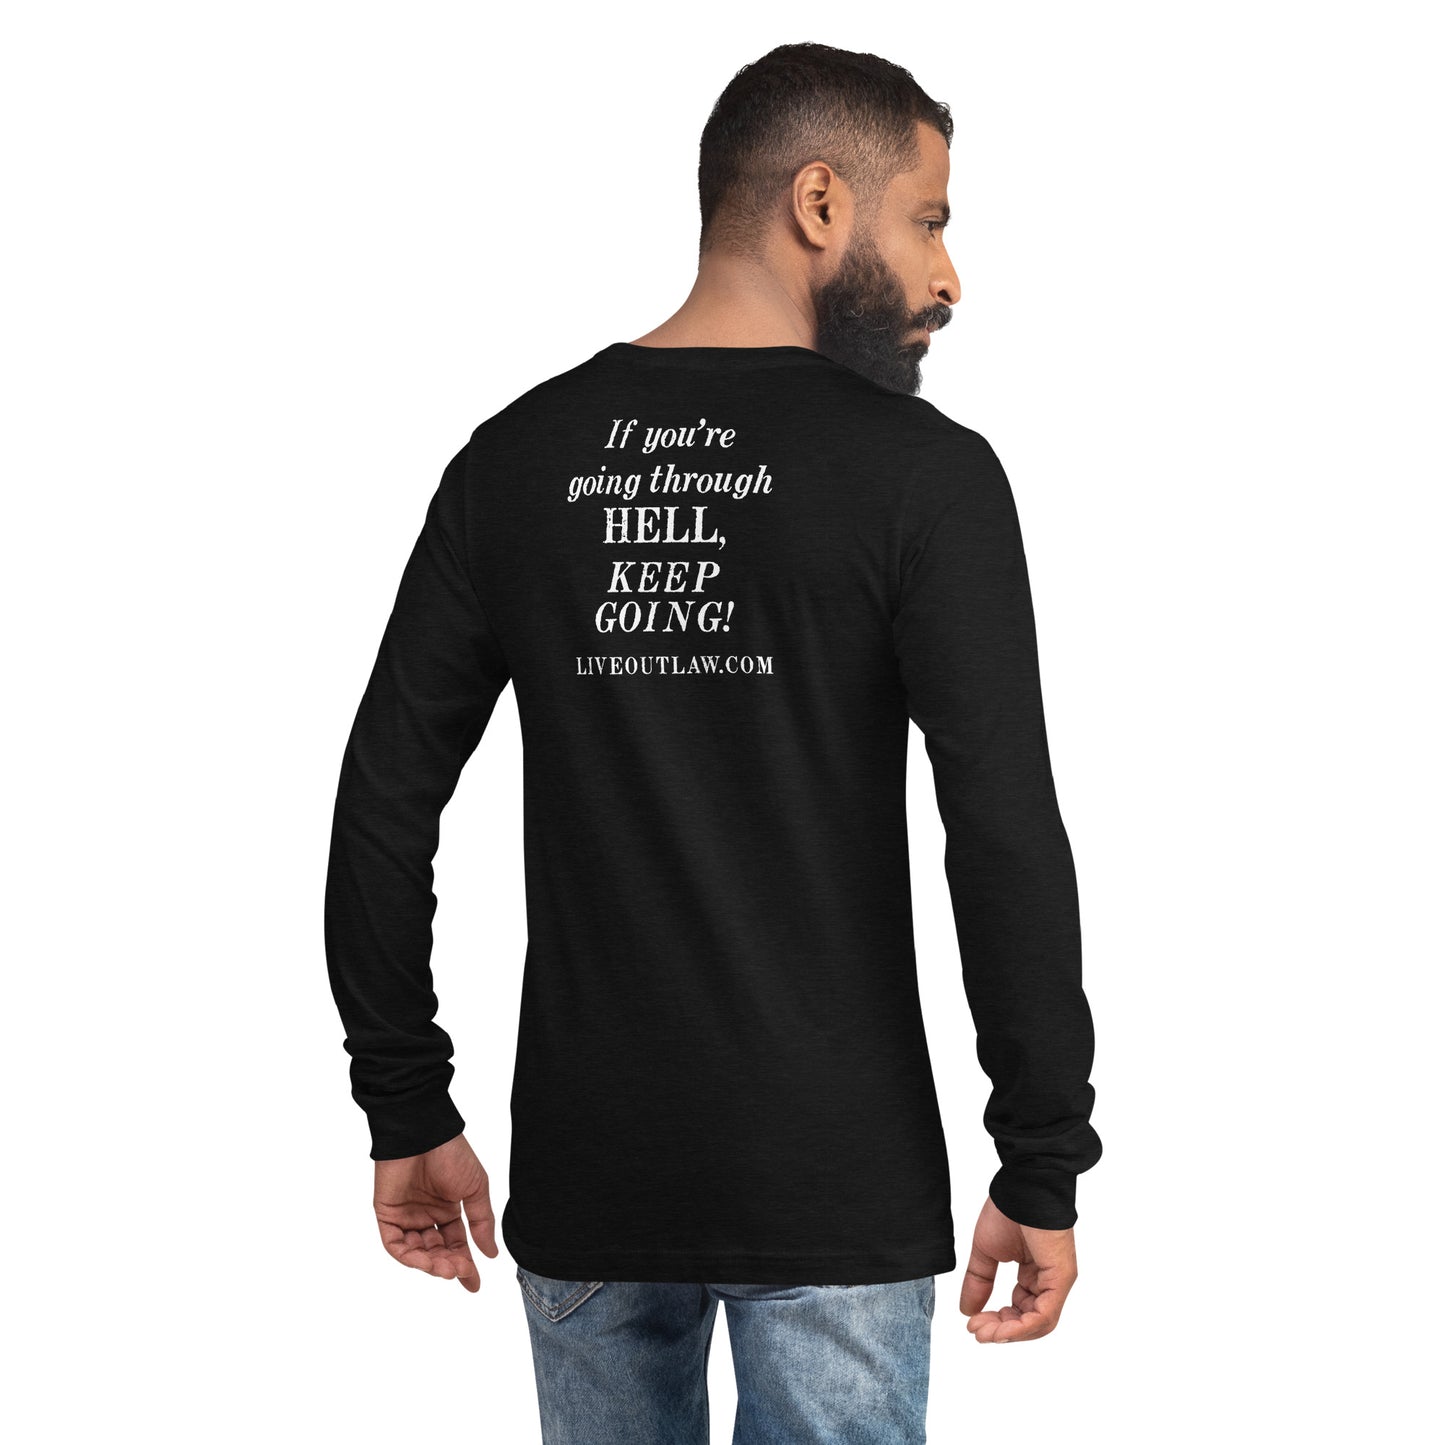 The Cursed Cowboy Limited Edition Black Long Sleeve T-Shirt